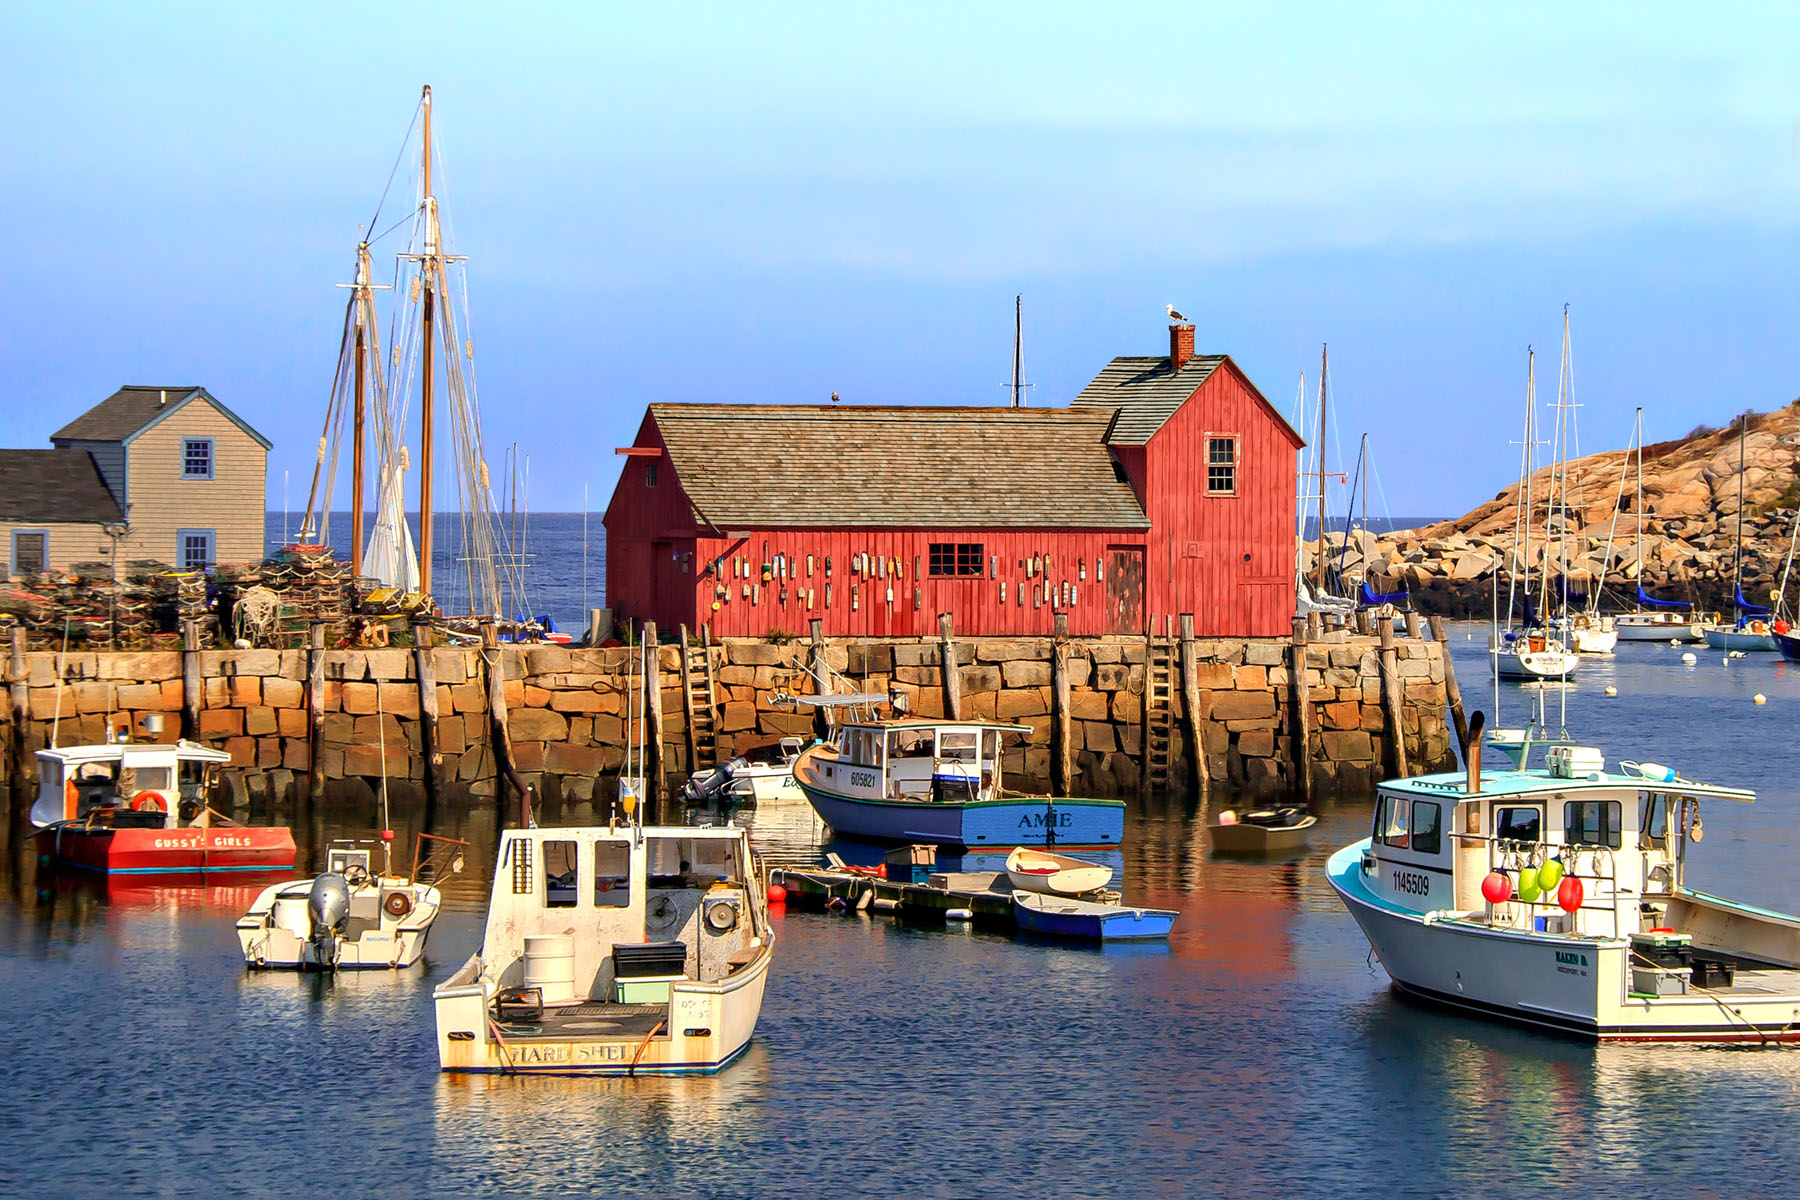 MOTIF #1 - Rockport, MA. -  A photographer's paradise. They say this lobster shack is the most "painted" building in the world. That's why it is officially called "Motif #1". It's probably also one of the most photographed.